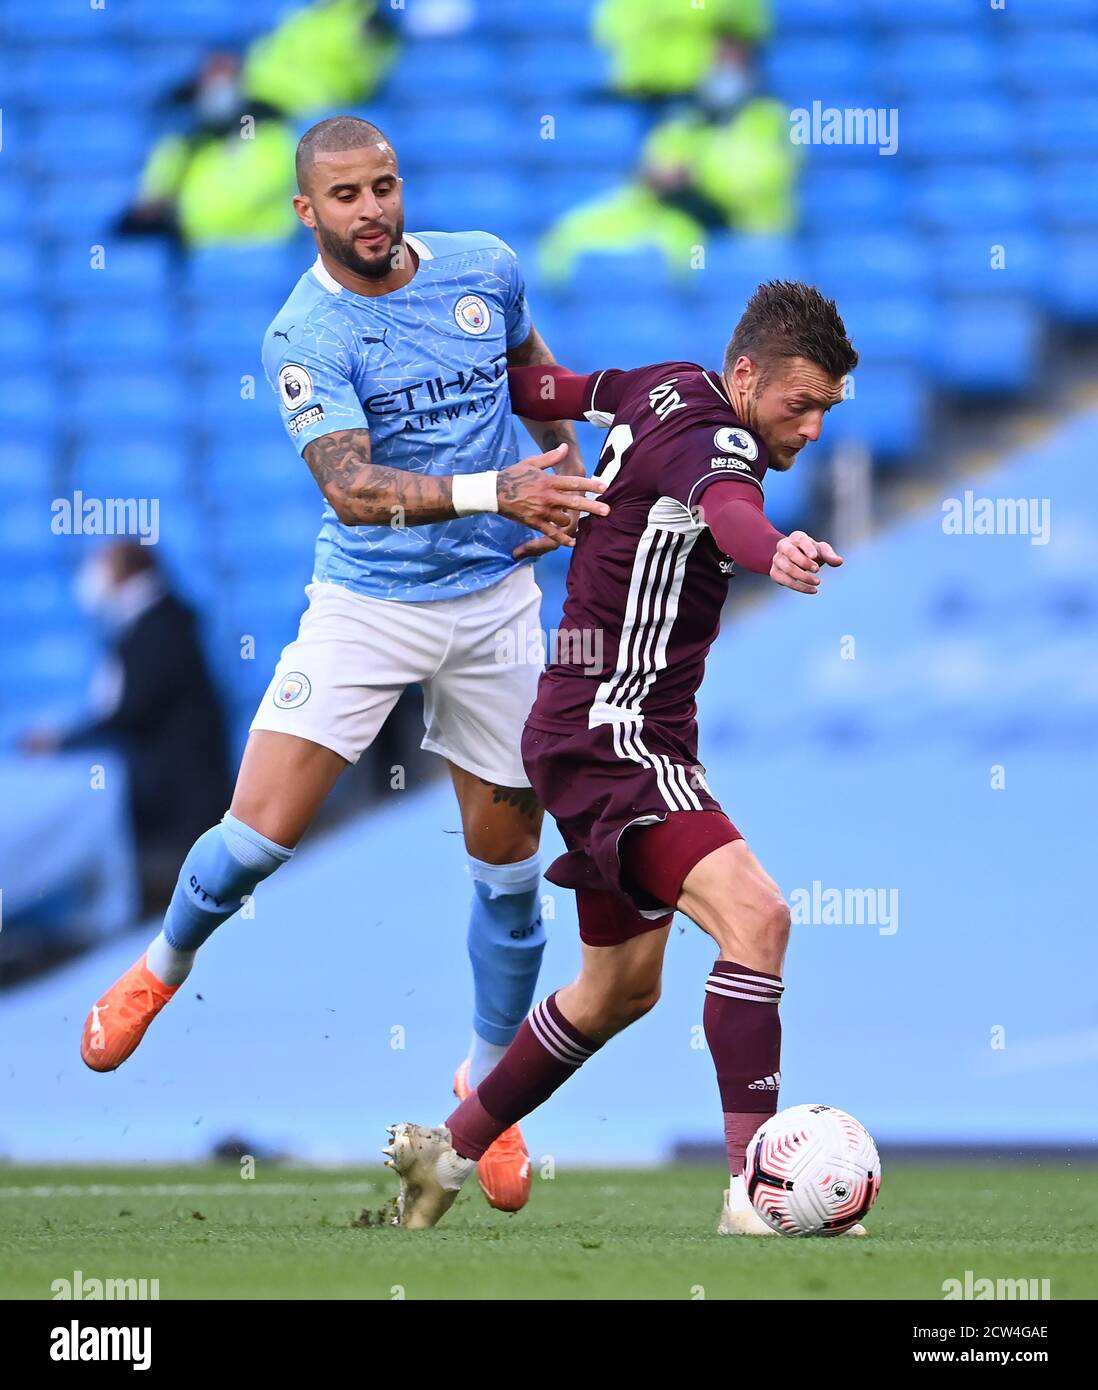 Manchester City's Kyle Walker (left) fouls Leicester City's Jamie Vardy to concede a penalty during the Premier League match at the Etihad Stadium, Manchester. Stock Photo